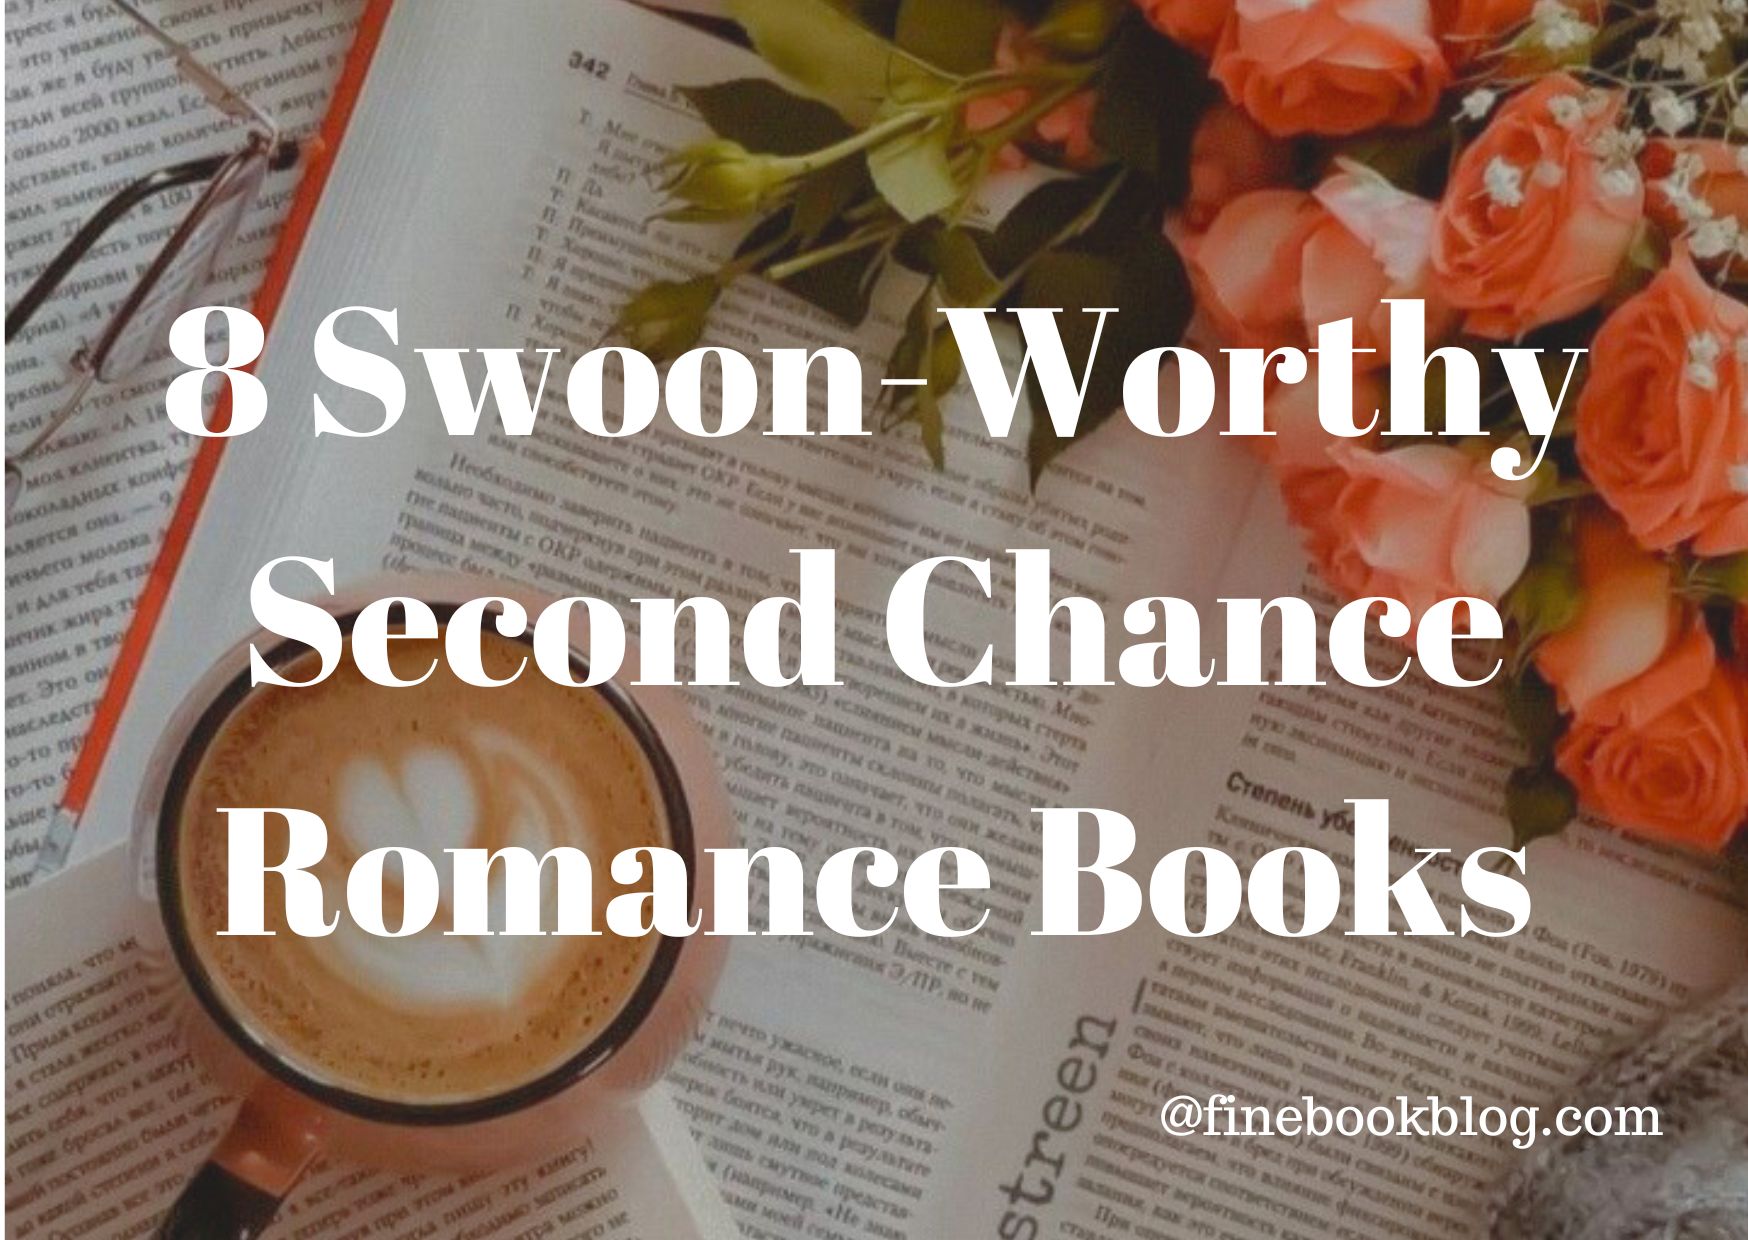 Swoon-worthy-second-chance-romance-books